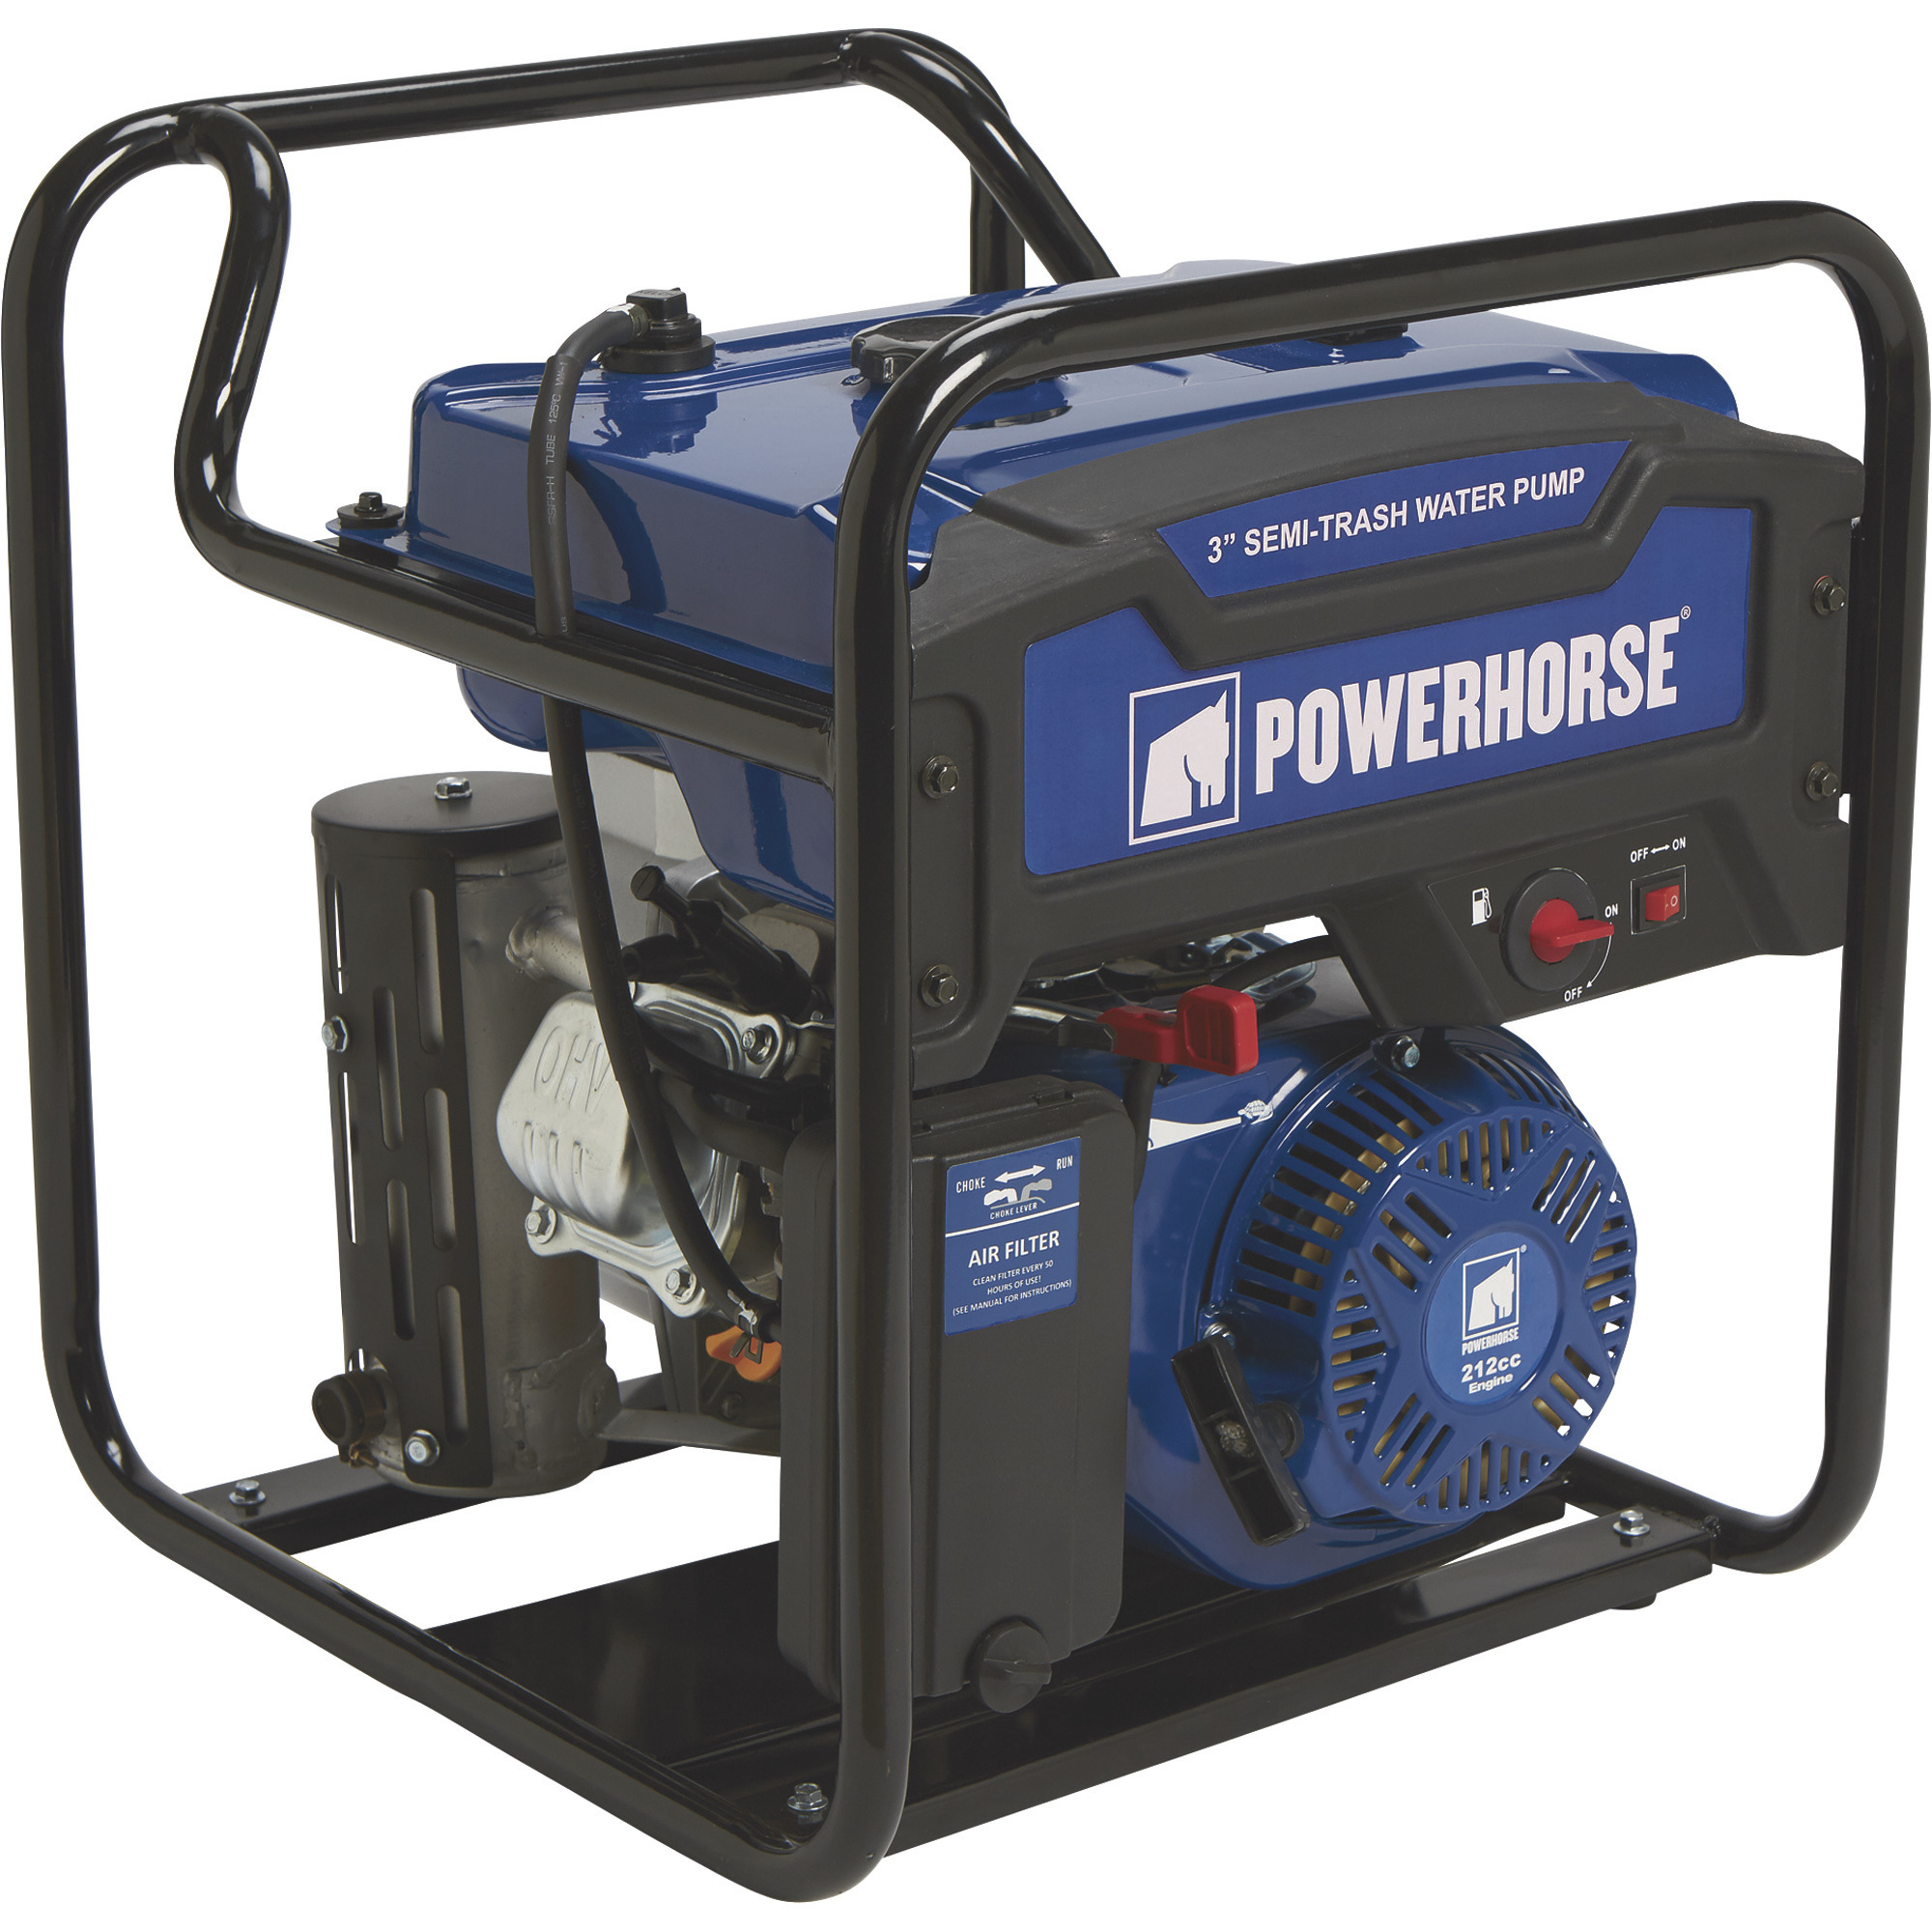 Powerhorse Extended Run Semi-Trash Water Pump, 3Inch Ports, 14,160 GPH, 5/8Inch Solids Capacity, 212cc OHV Engine, Model DS30